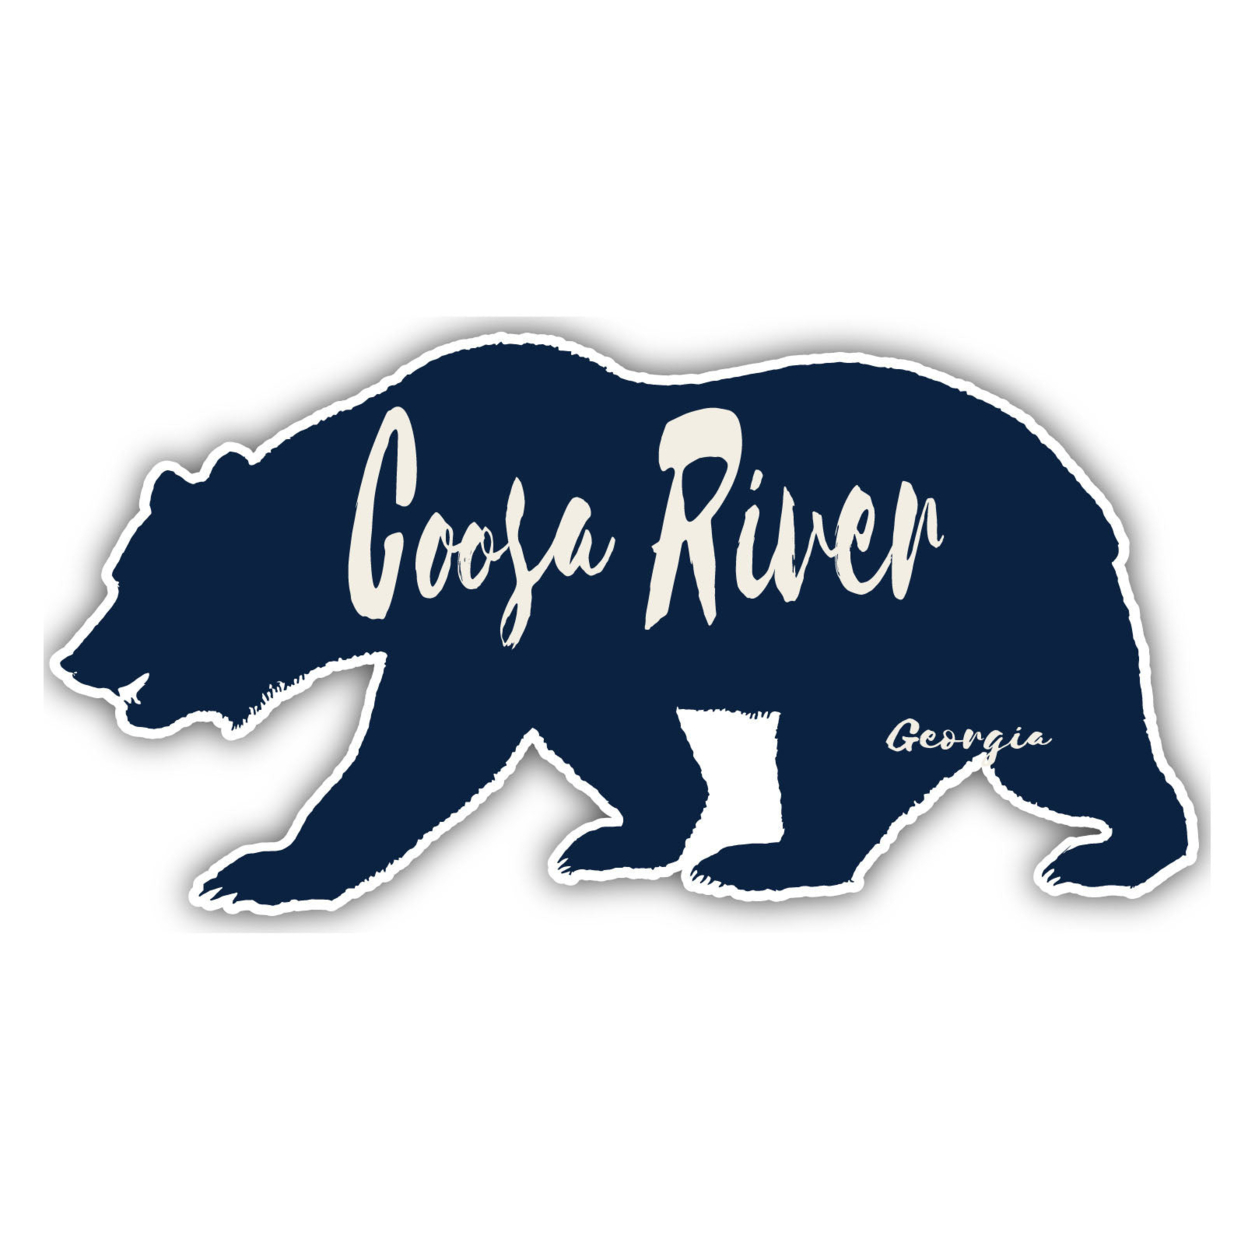 Coosa River Georgia Souvenir Decorative Stickers (Choose Theme And Size) - 4-Pack, 4-Inch, Bear